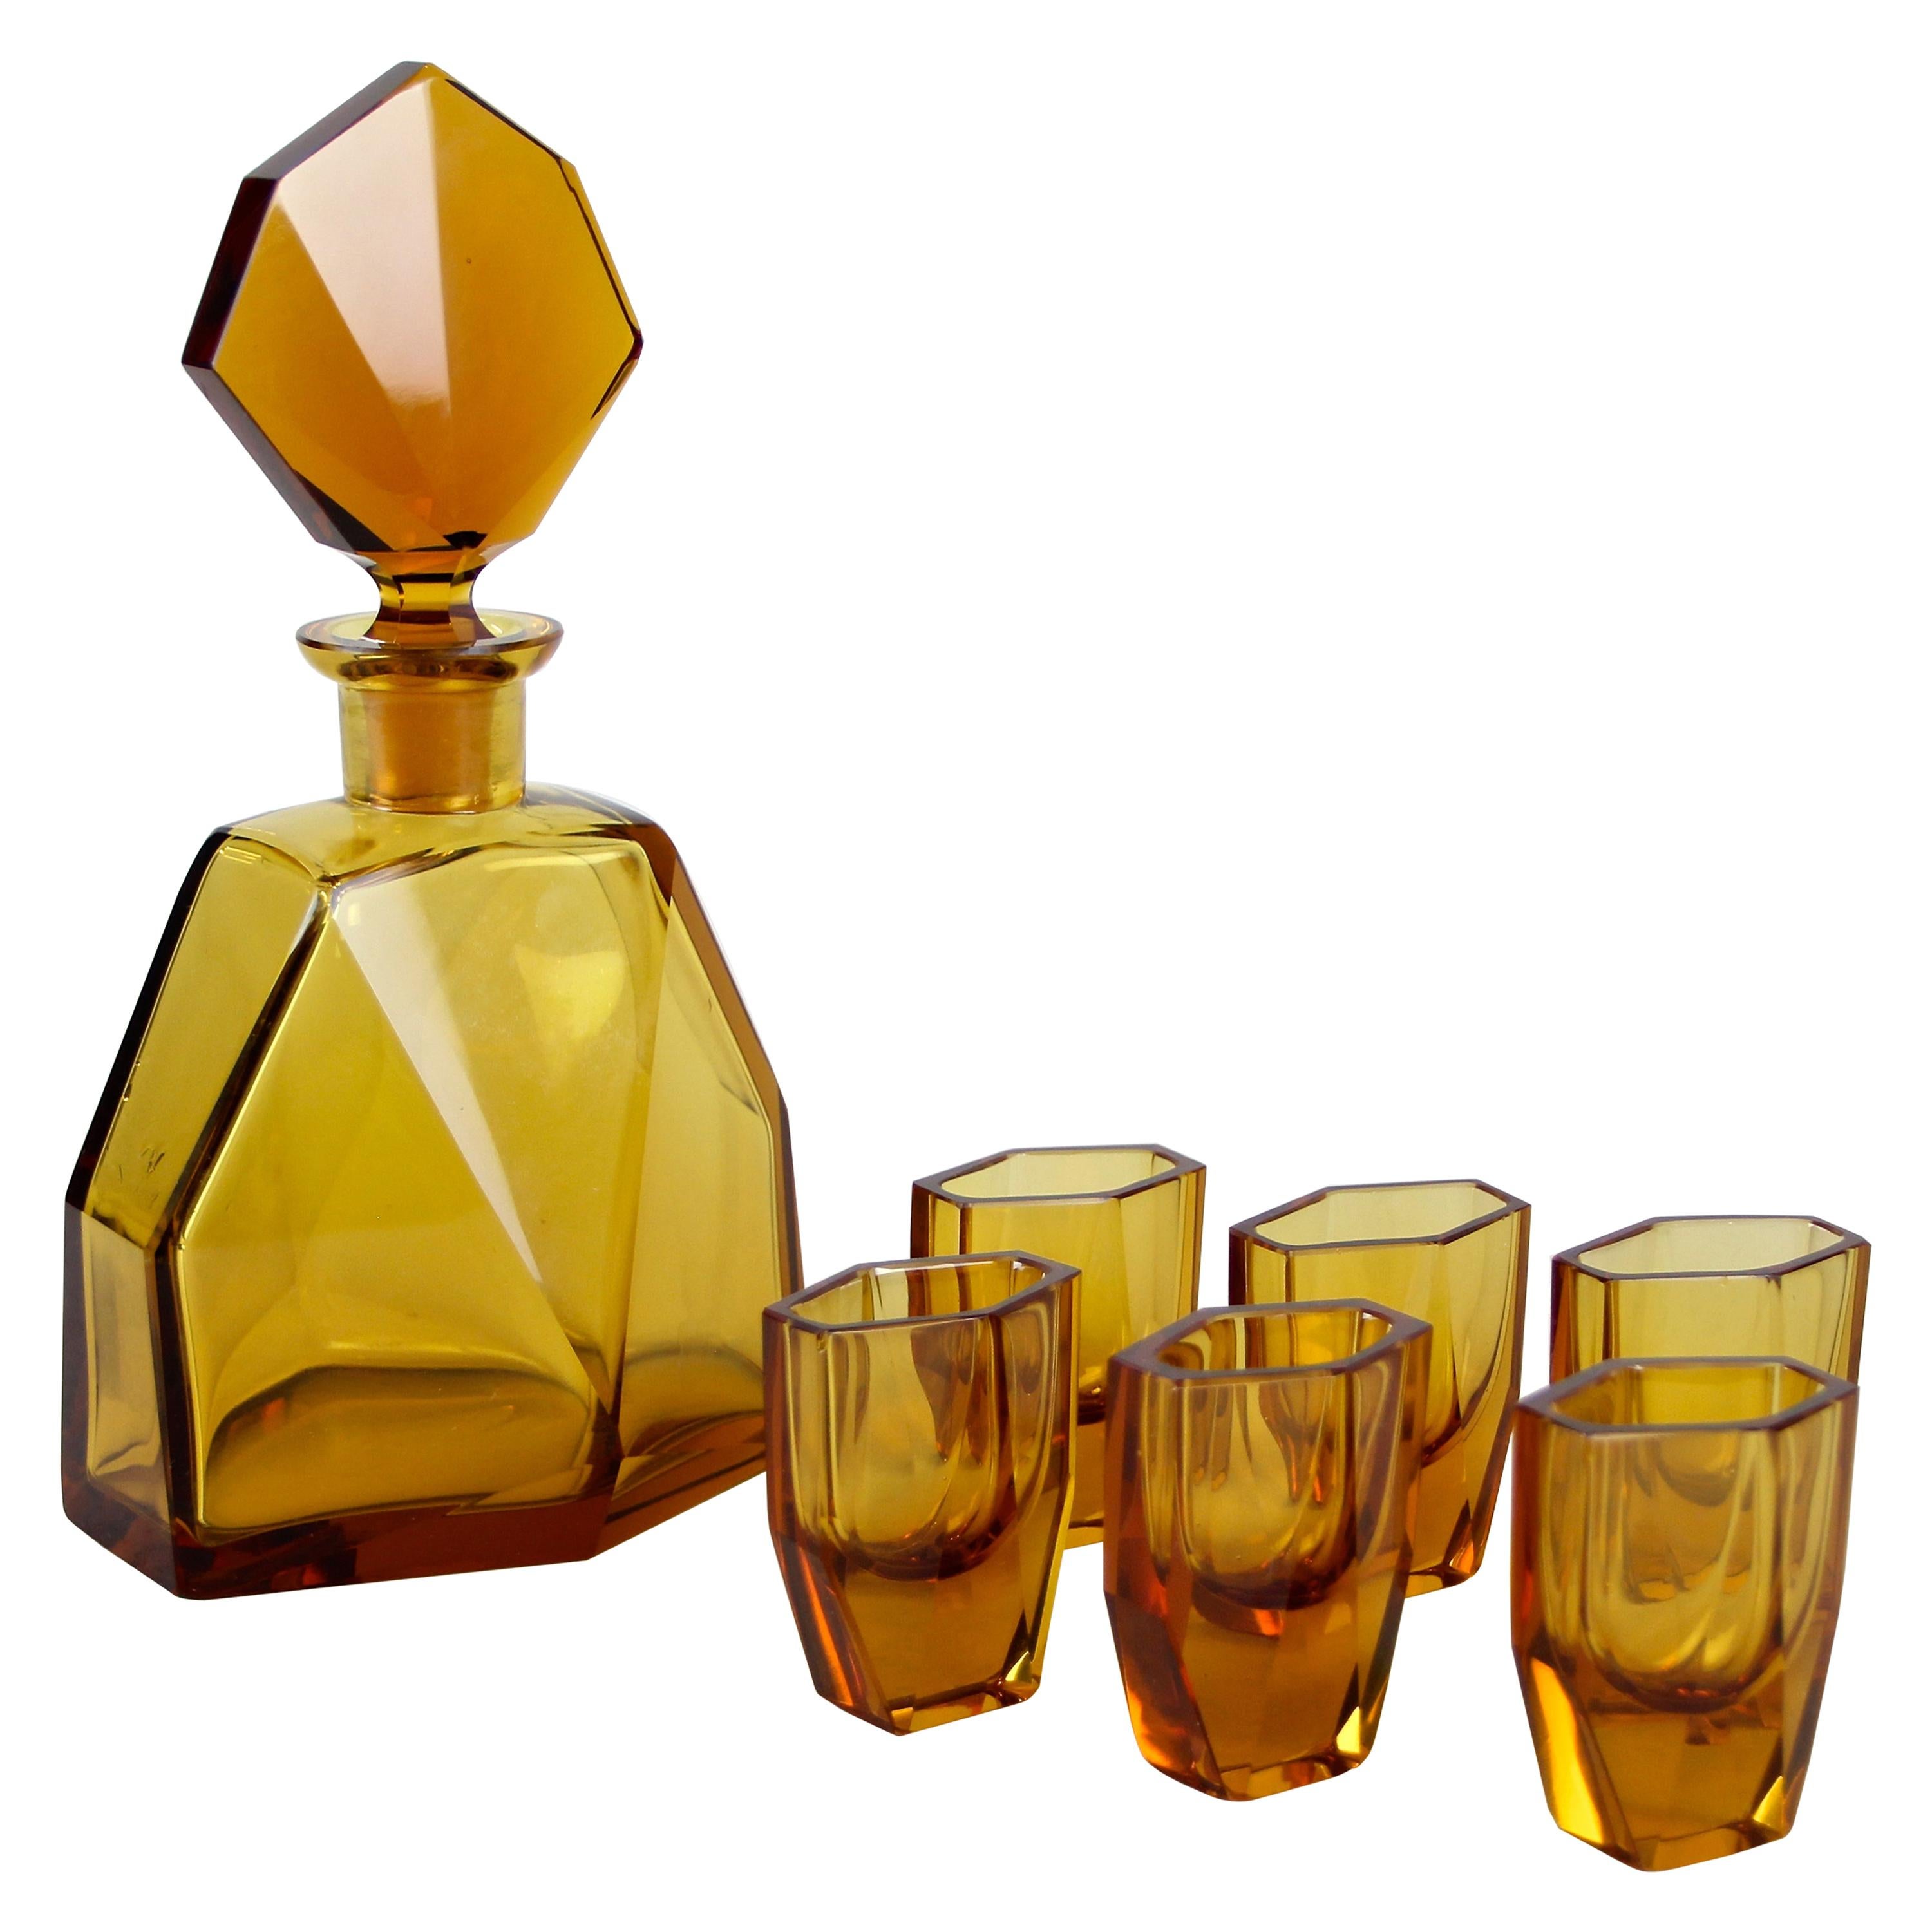 Outstanding design glass liquor set of seven from the Art Deco period in the Czech Republic, circa 1925. Reminding of the style of famous Ludwig Moser, this timeless designed amber colored liquor set consists of six unusual shaped shot glasses and a